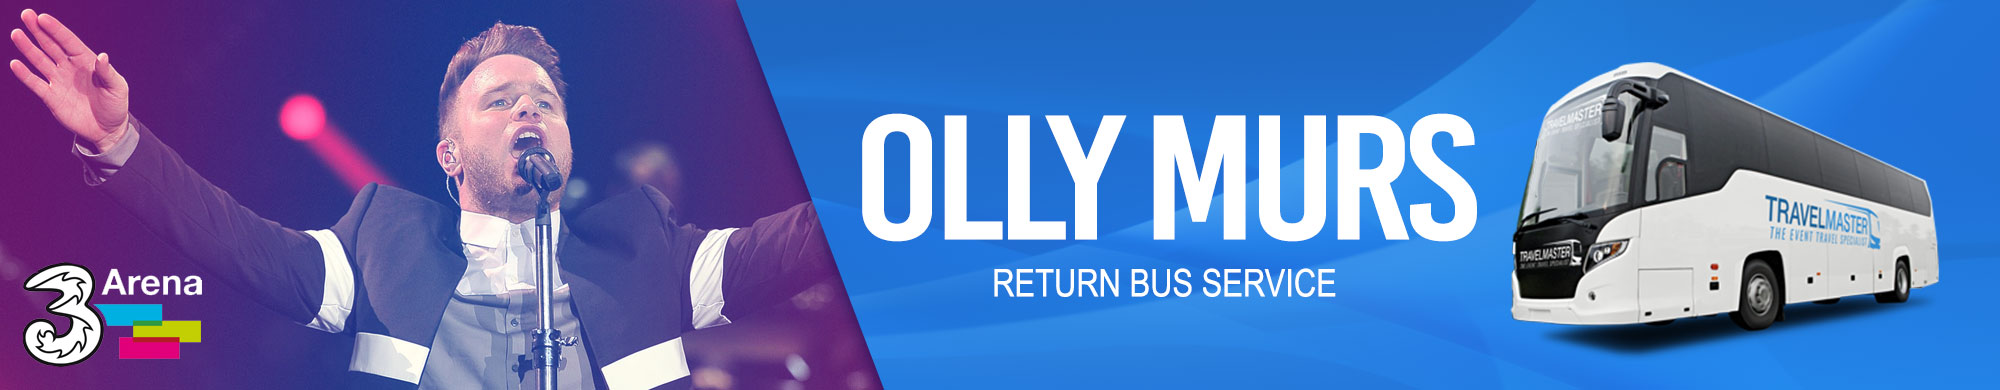 Bus to Olly Murs 3Arena